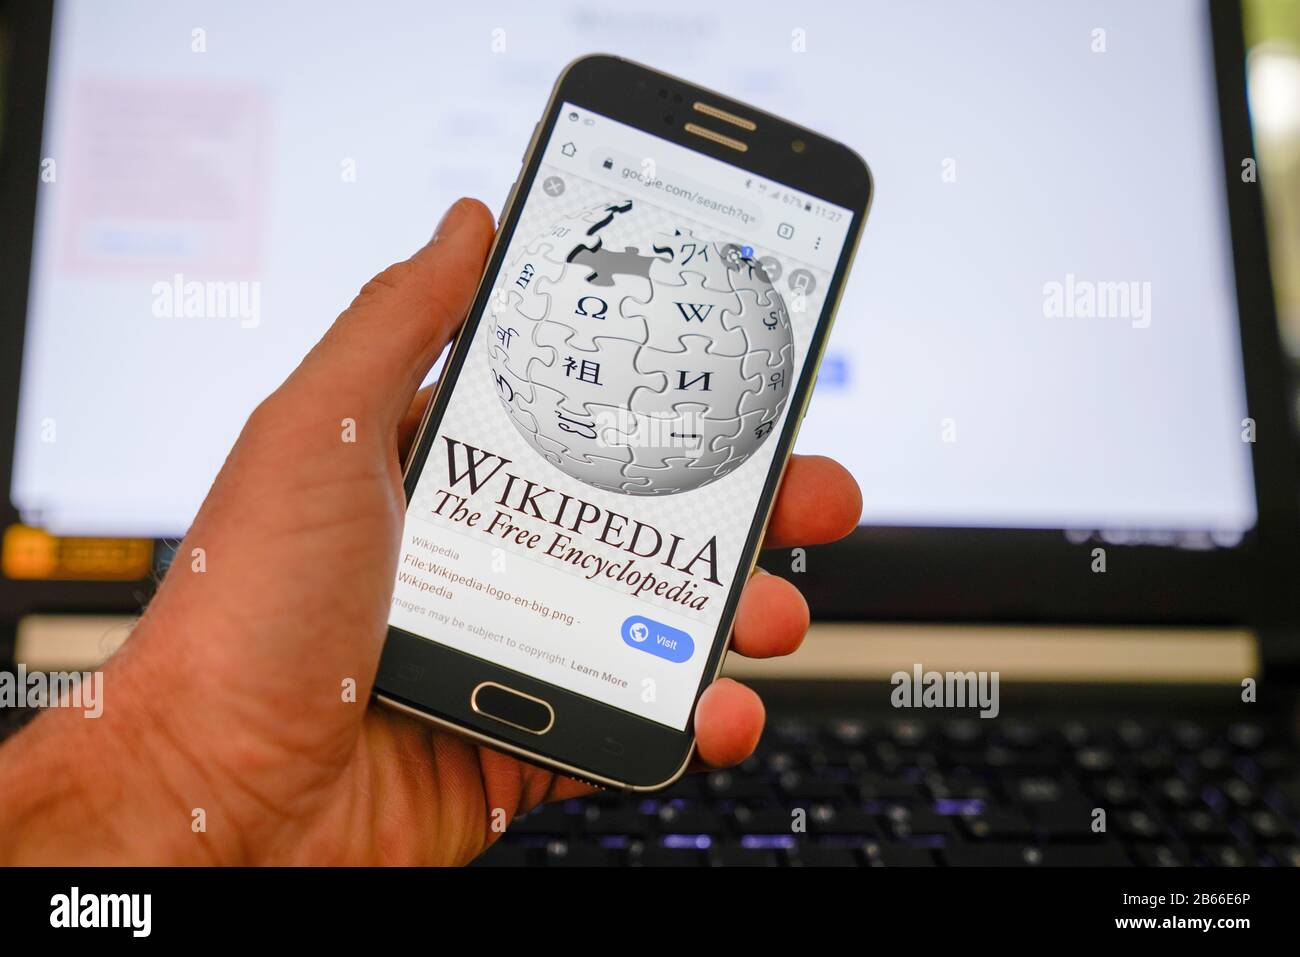 Bordeaux , Aquitaine / France - 10 11 2019 : Hands holding smartphone displaying logo of Wikipedia website homepage on a screen Stock Photo